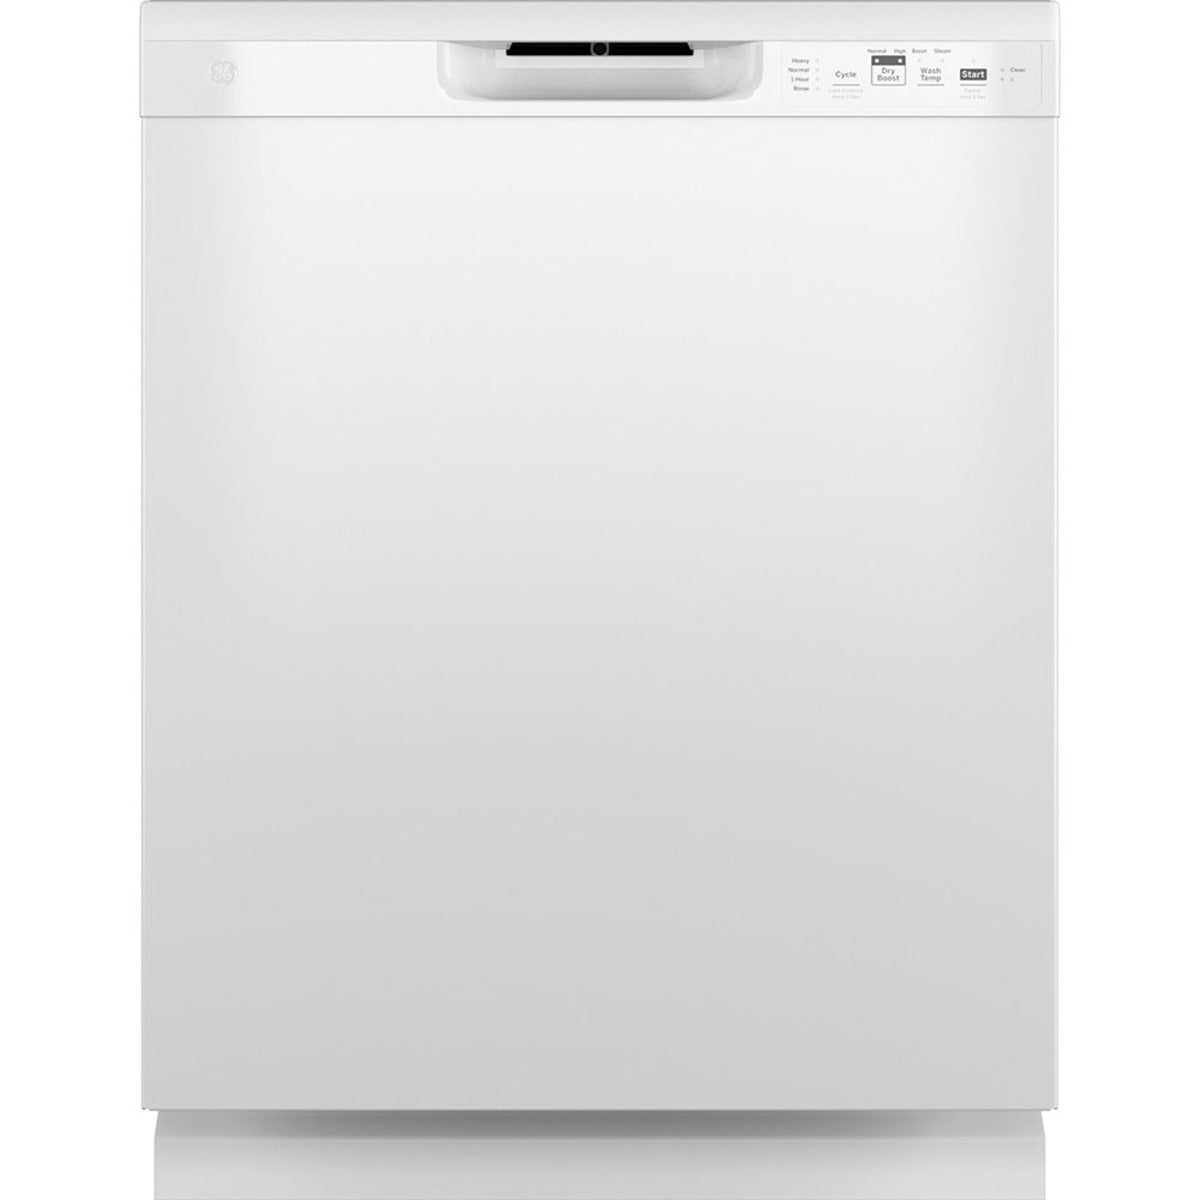 GE 24" Built-In Front Control Dishwasher White GDF511PGRWW